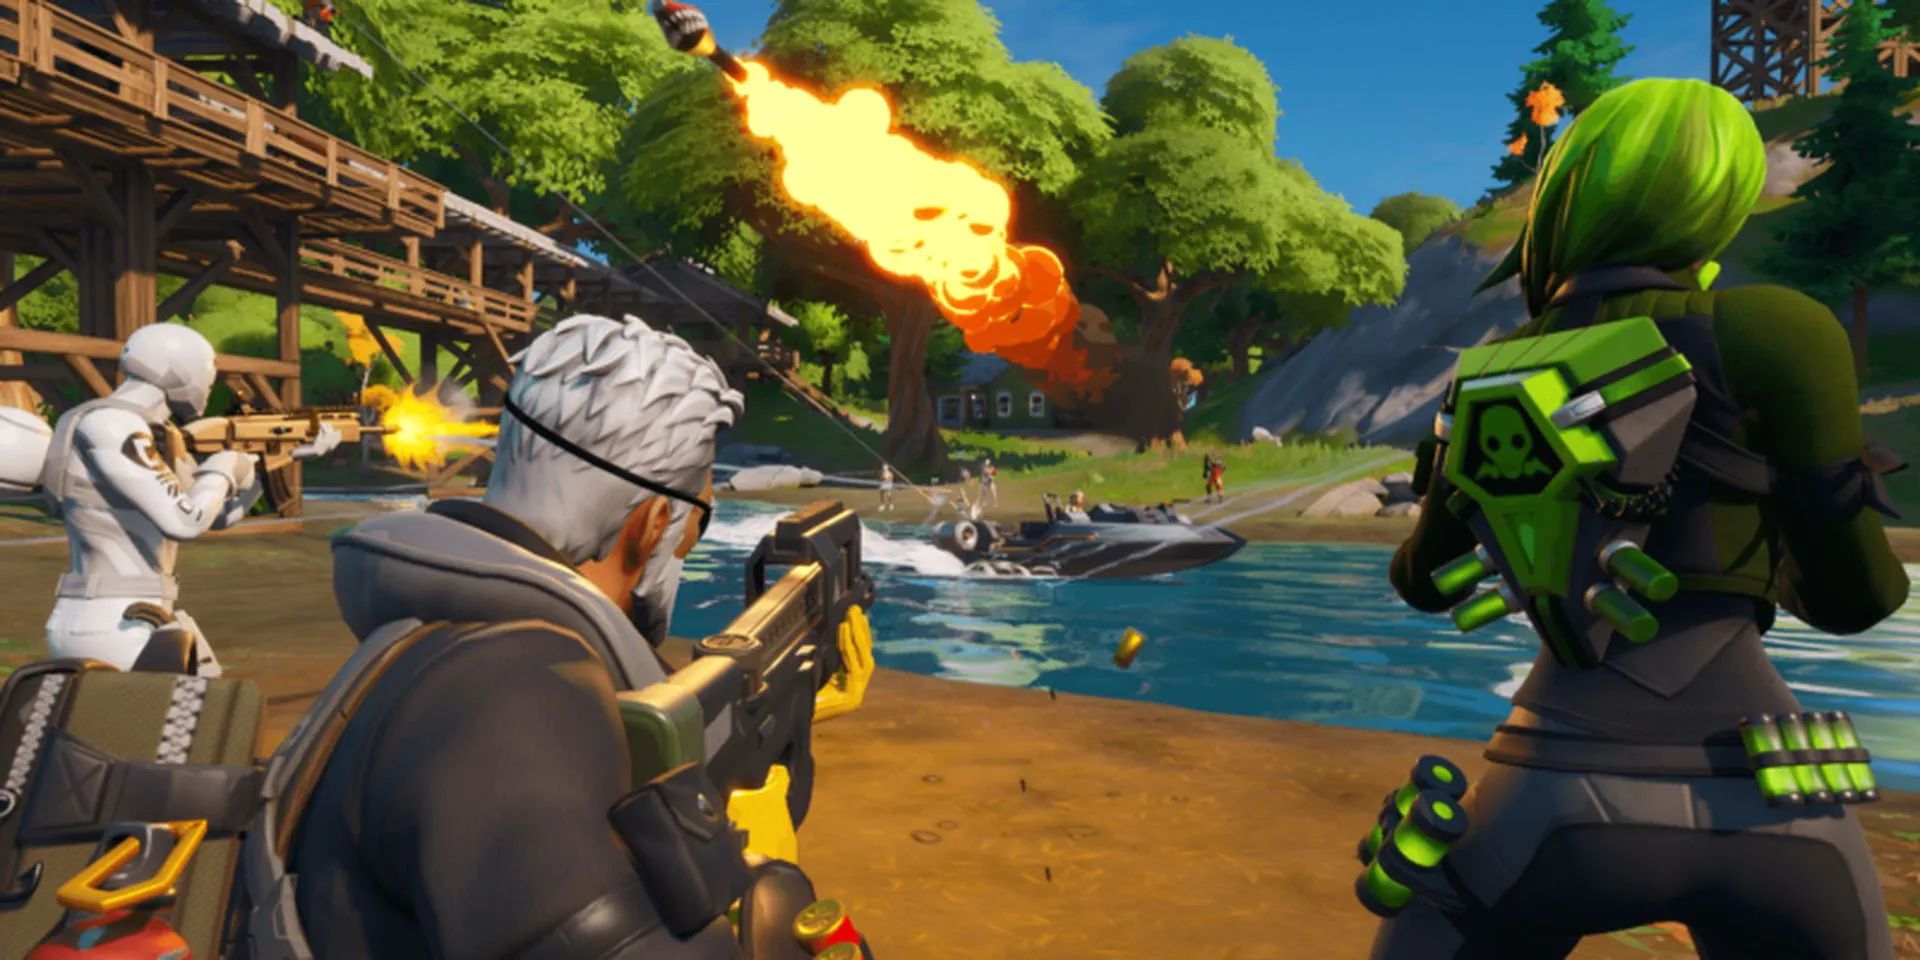 In this article, we are going to be going over the Fortnite error code ls-0016 fix, so you can enjoy the popular battle royale game without problems.